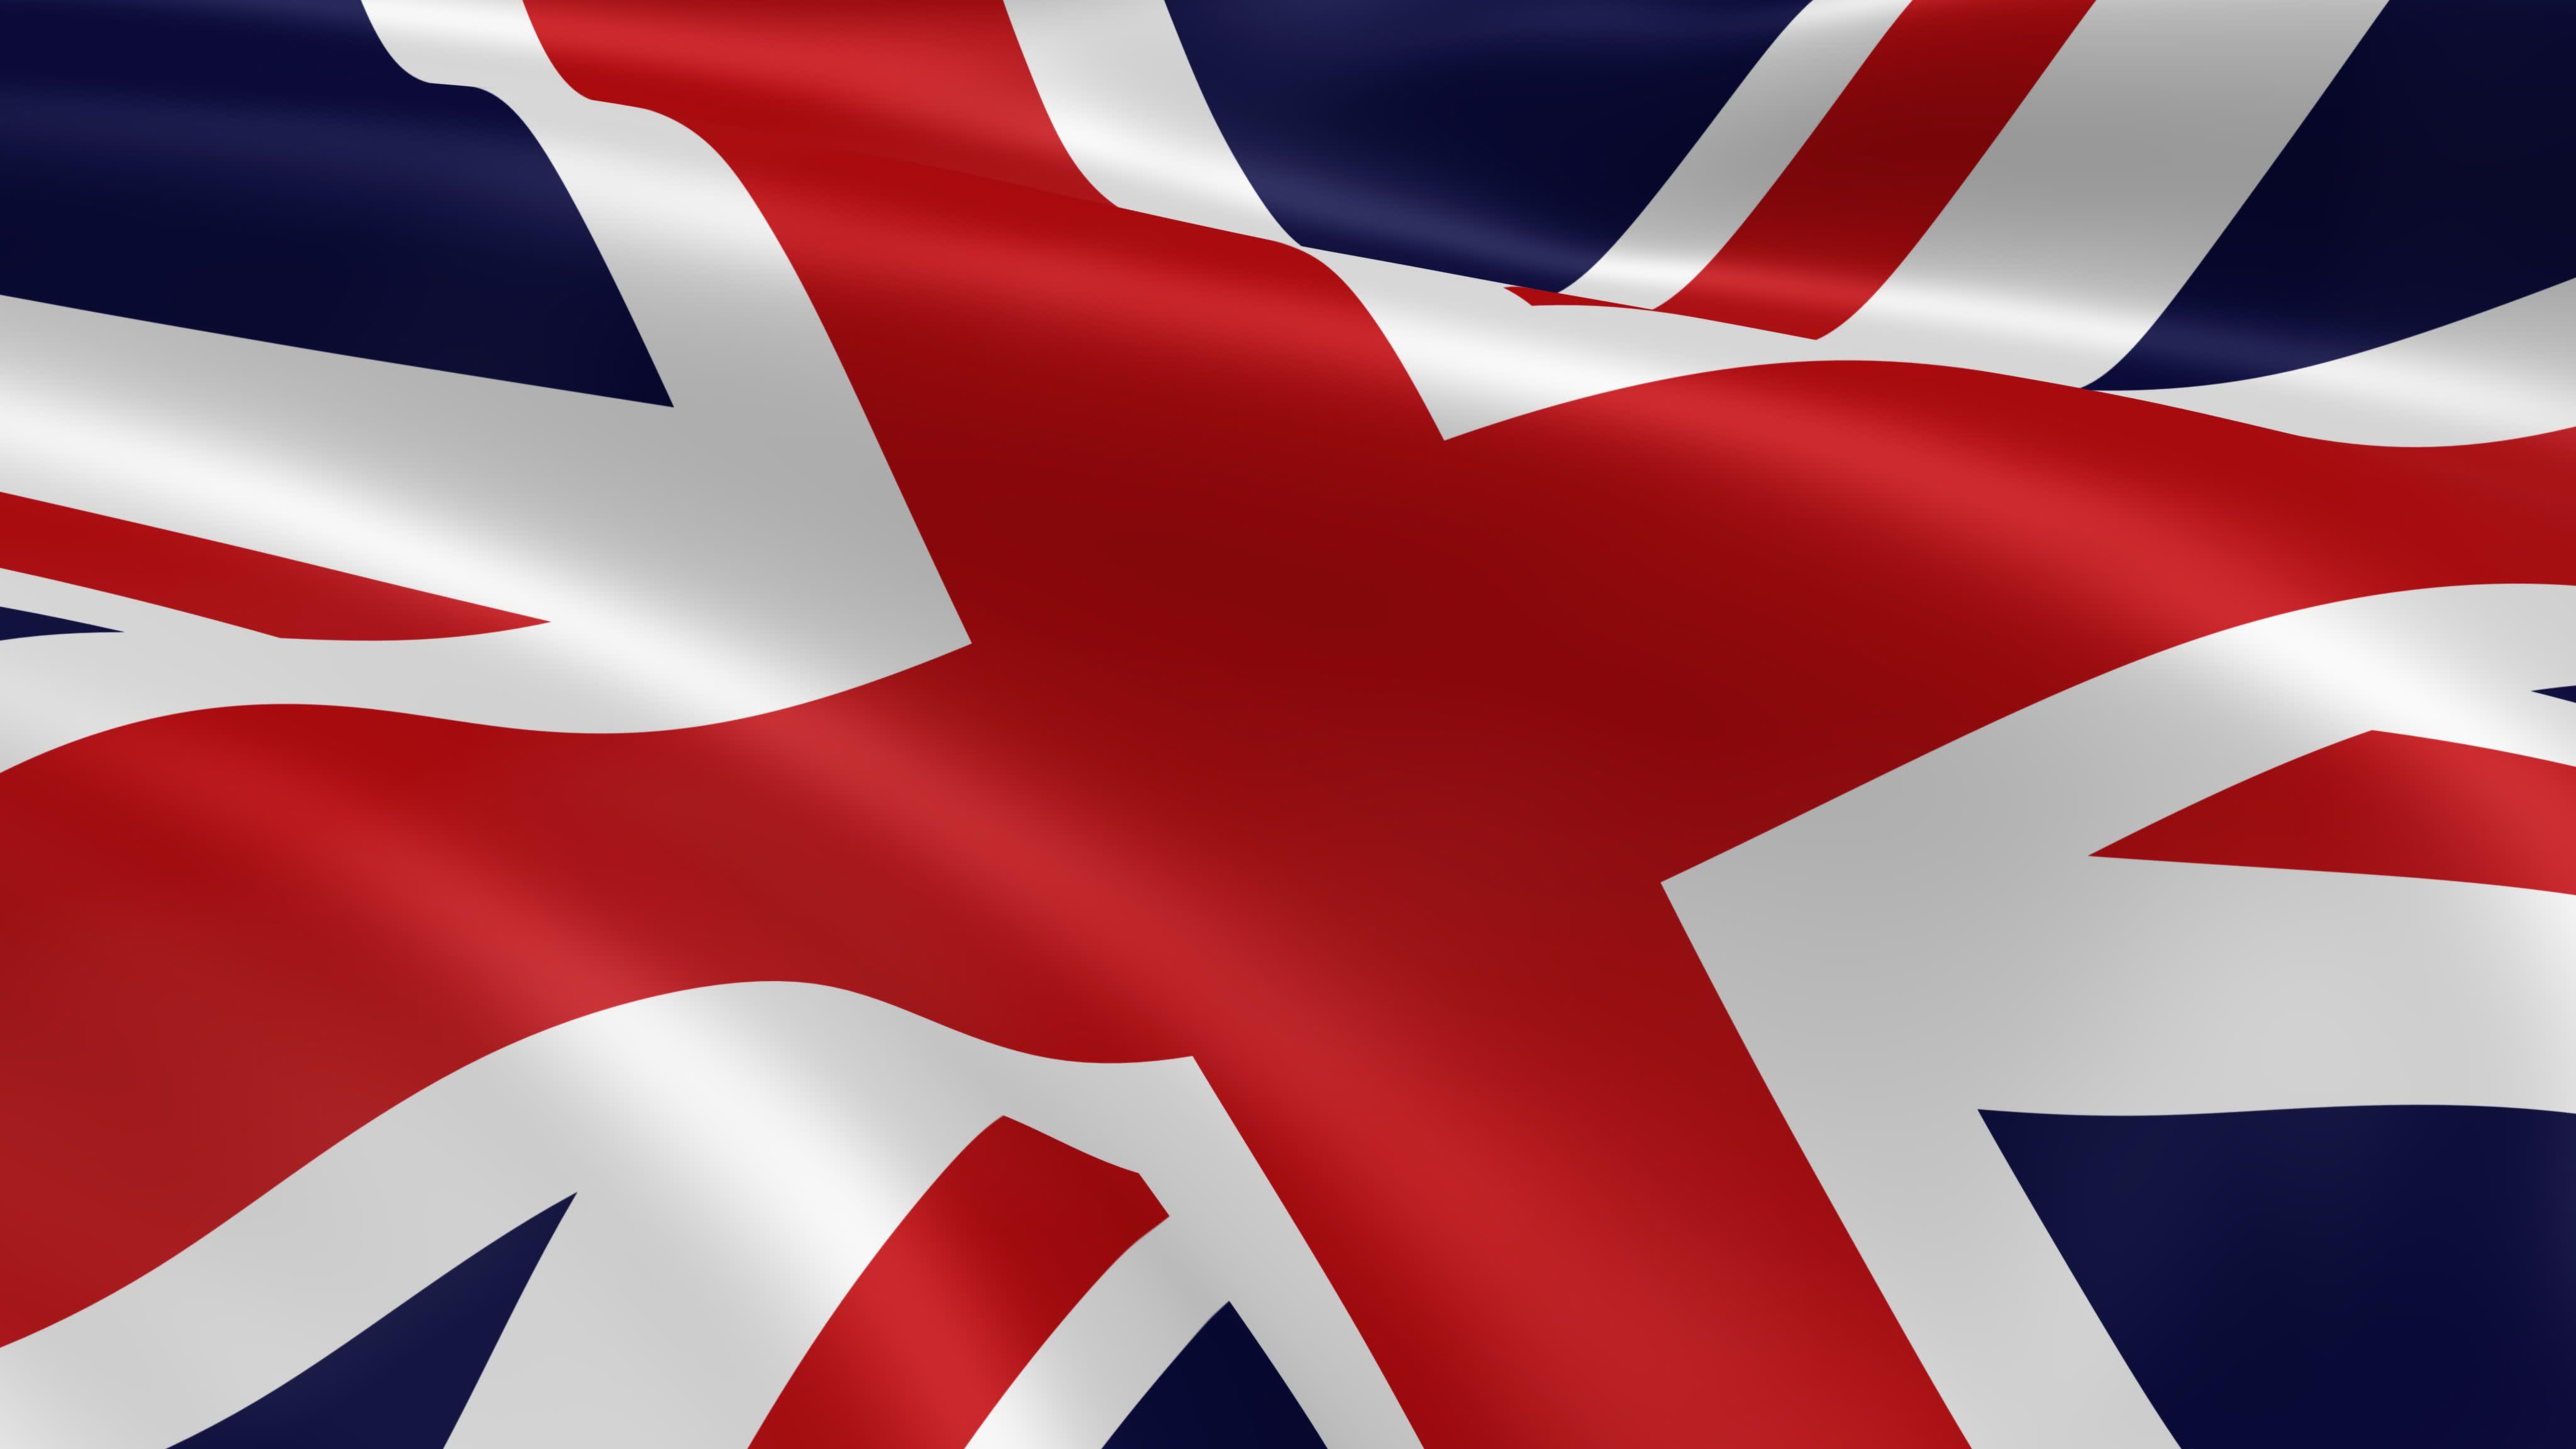 Union Jack Flag Wallpapers - Wallpaper Cave